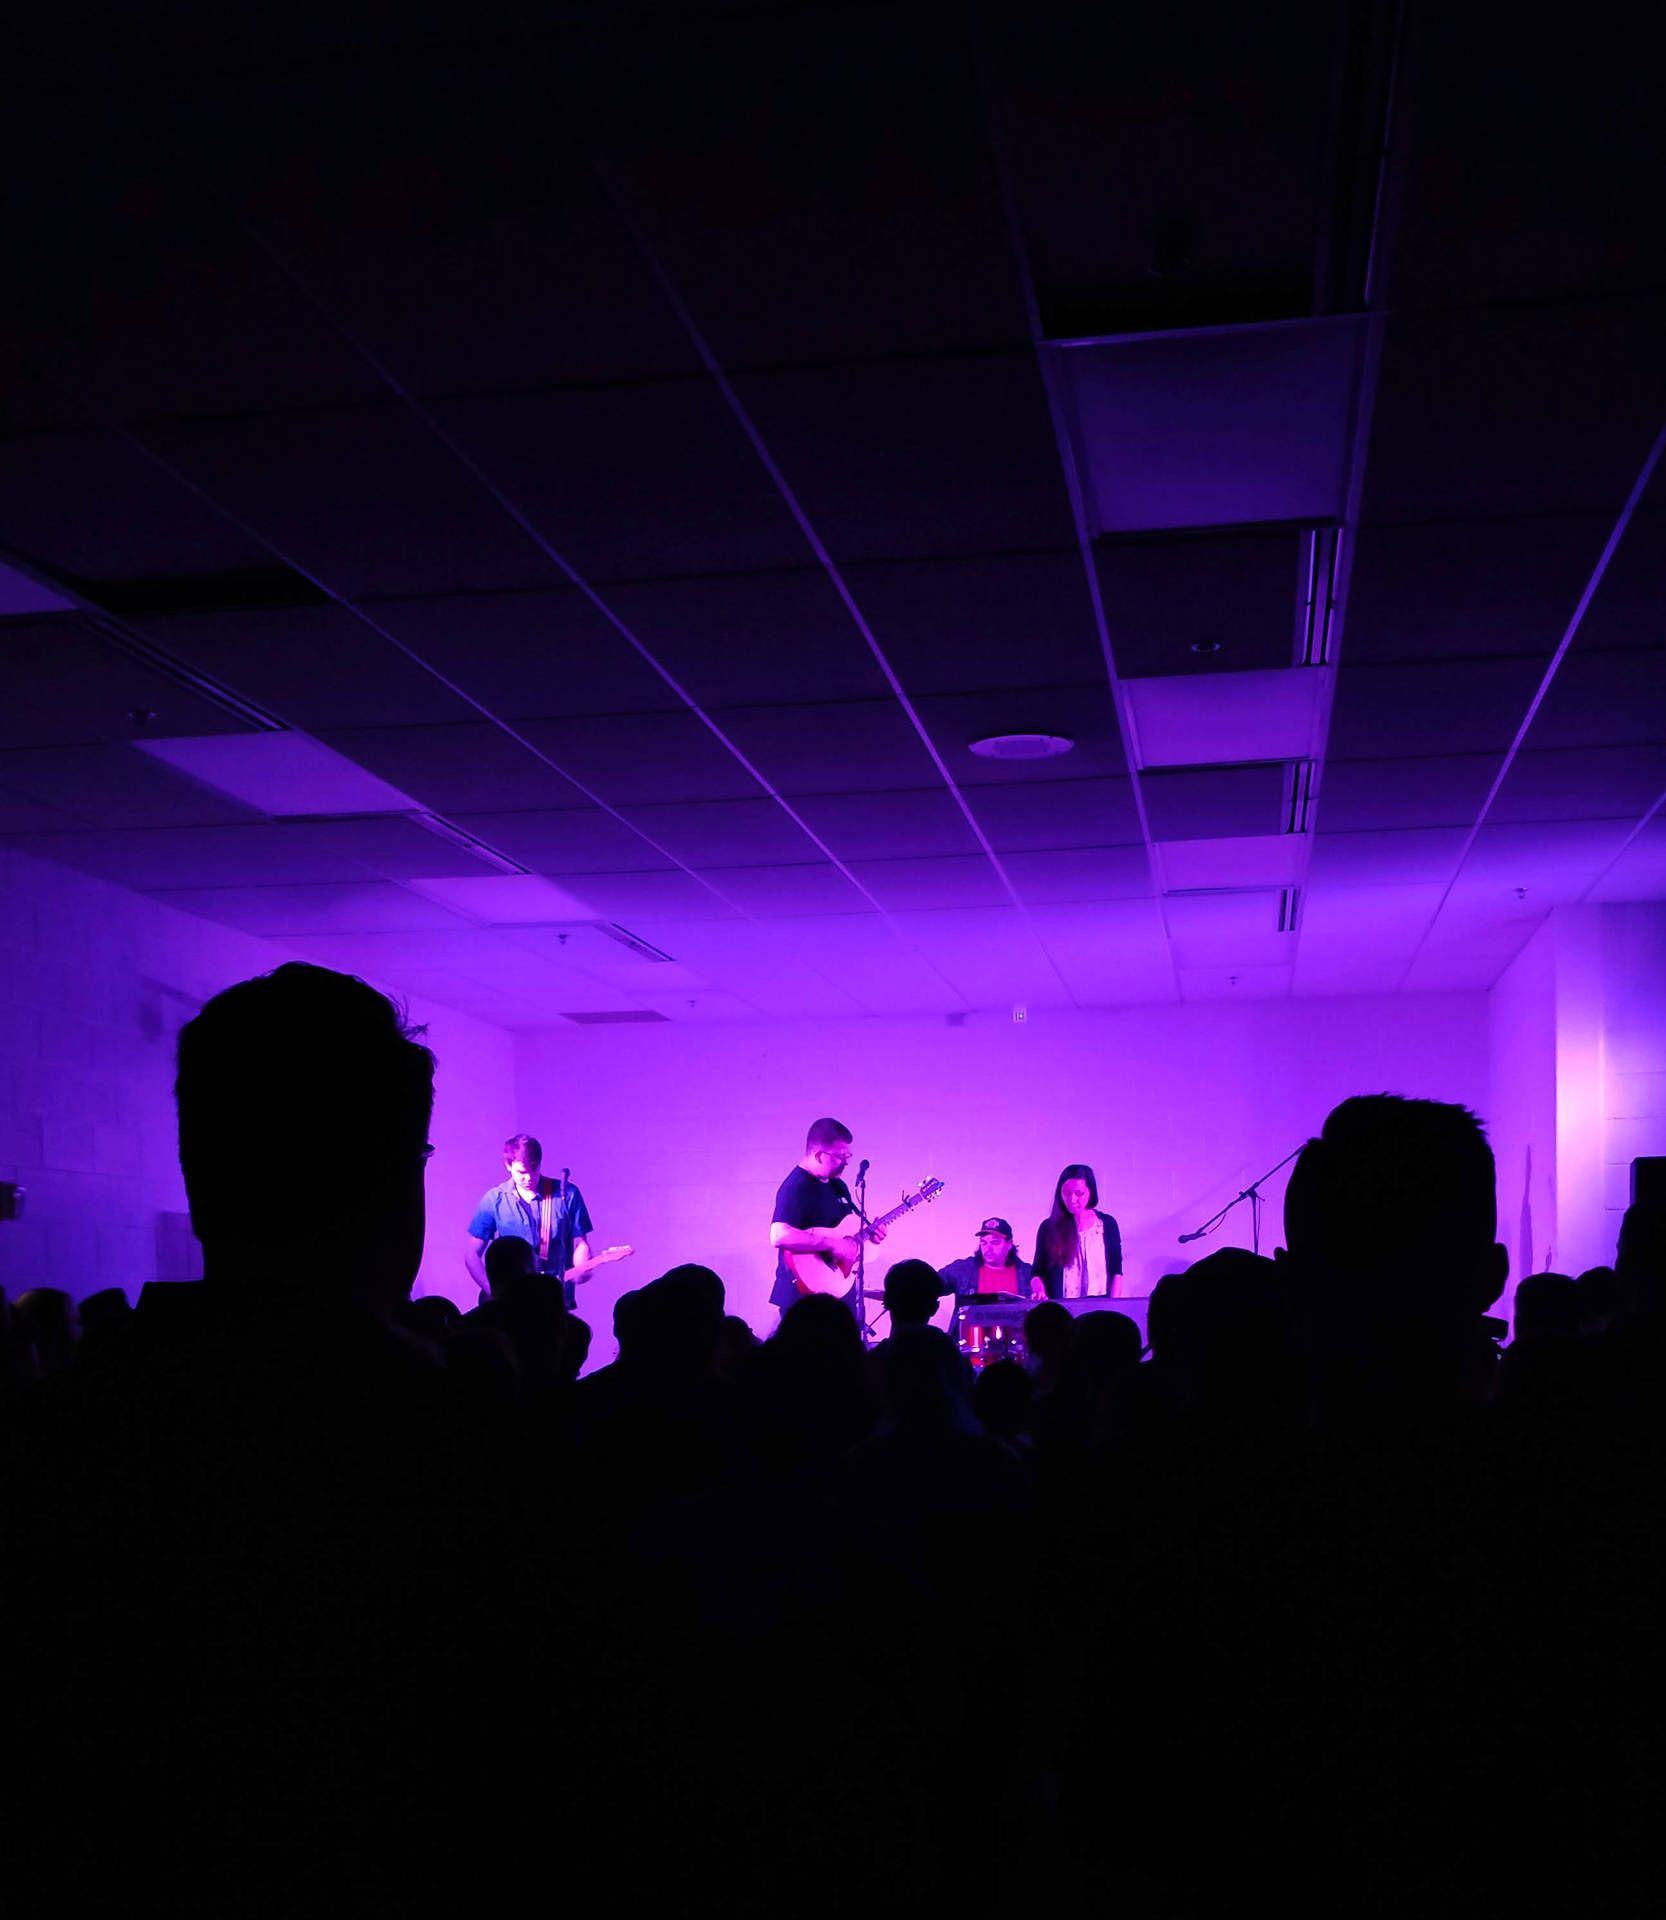 Acoustic Concert With Light Purple Lighting Wallpaper